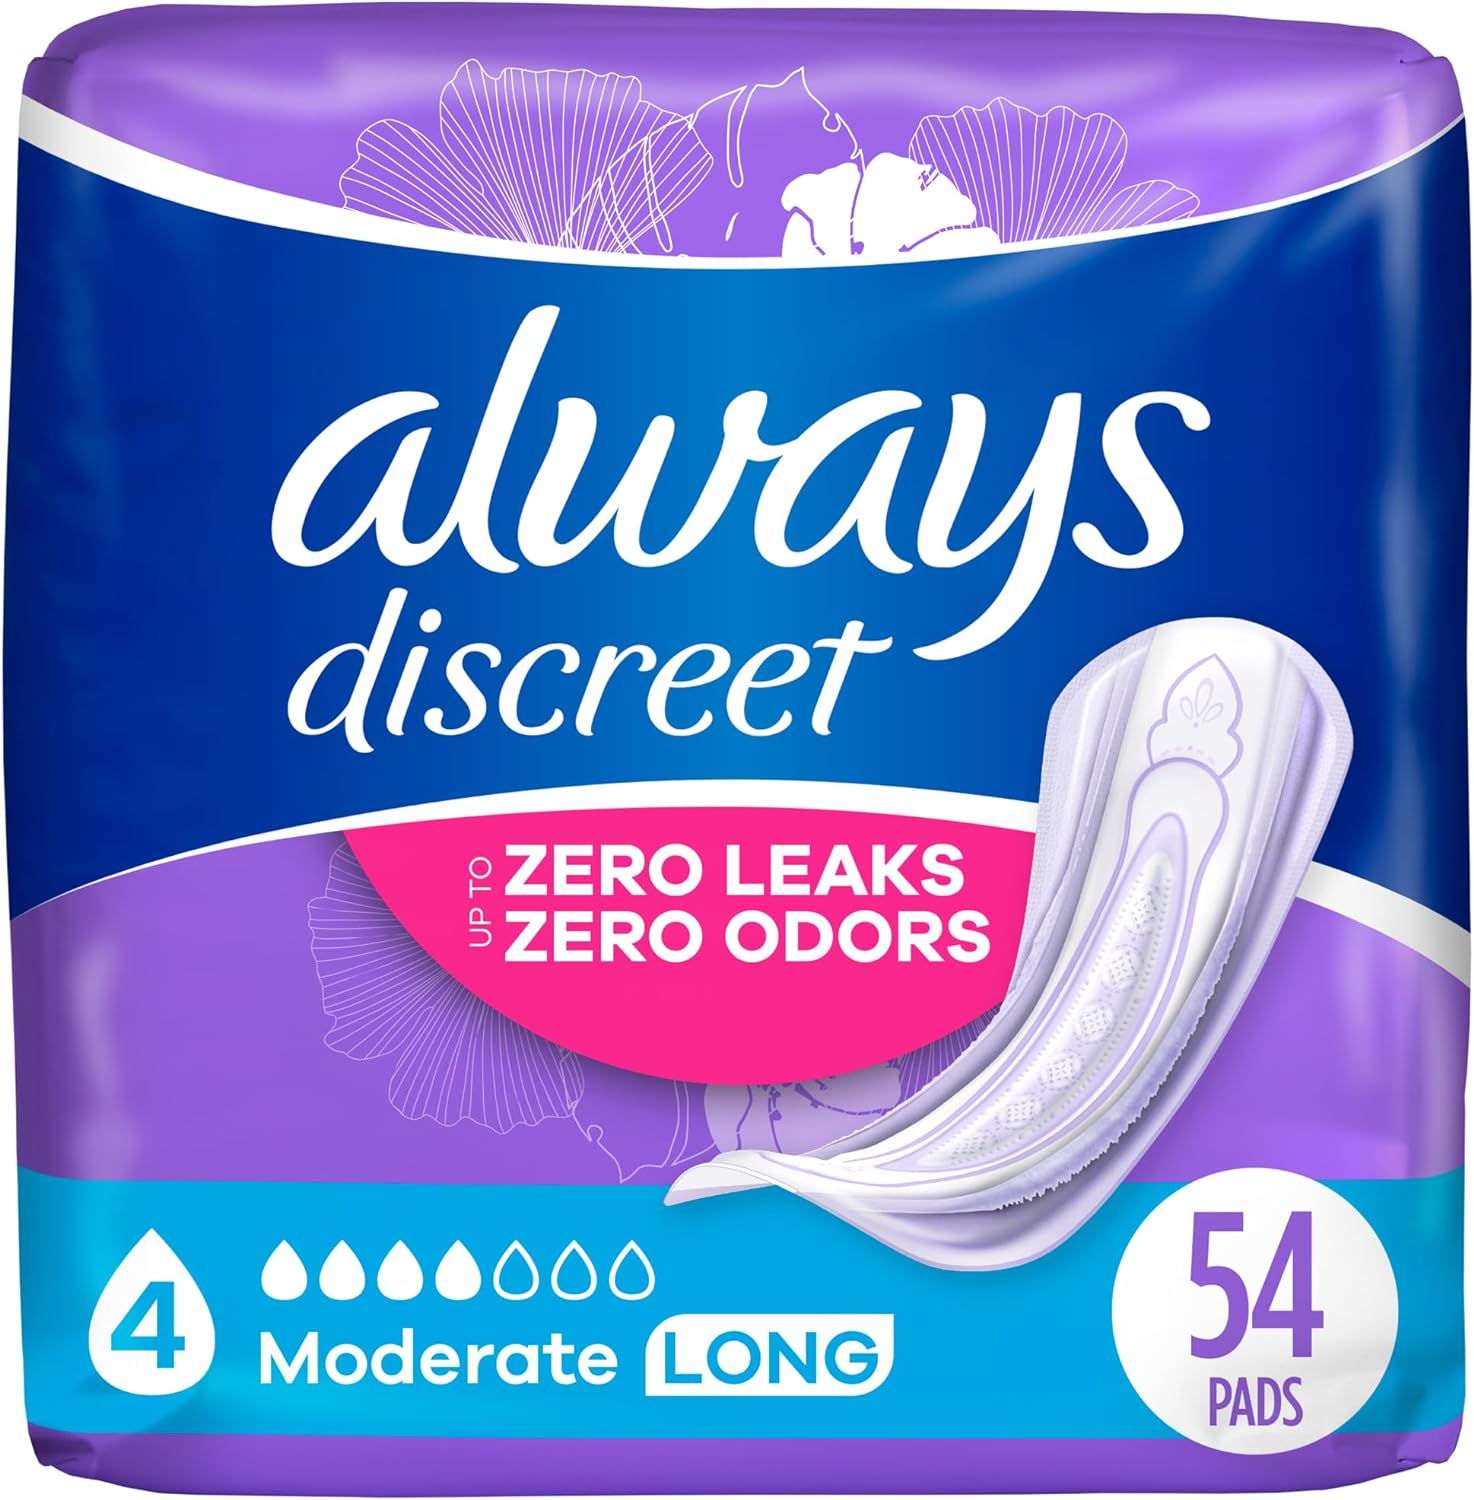 Best Female Incontinence Products  Always Discreet Adult Incontinence Pads review